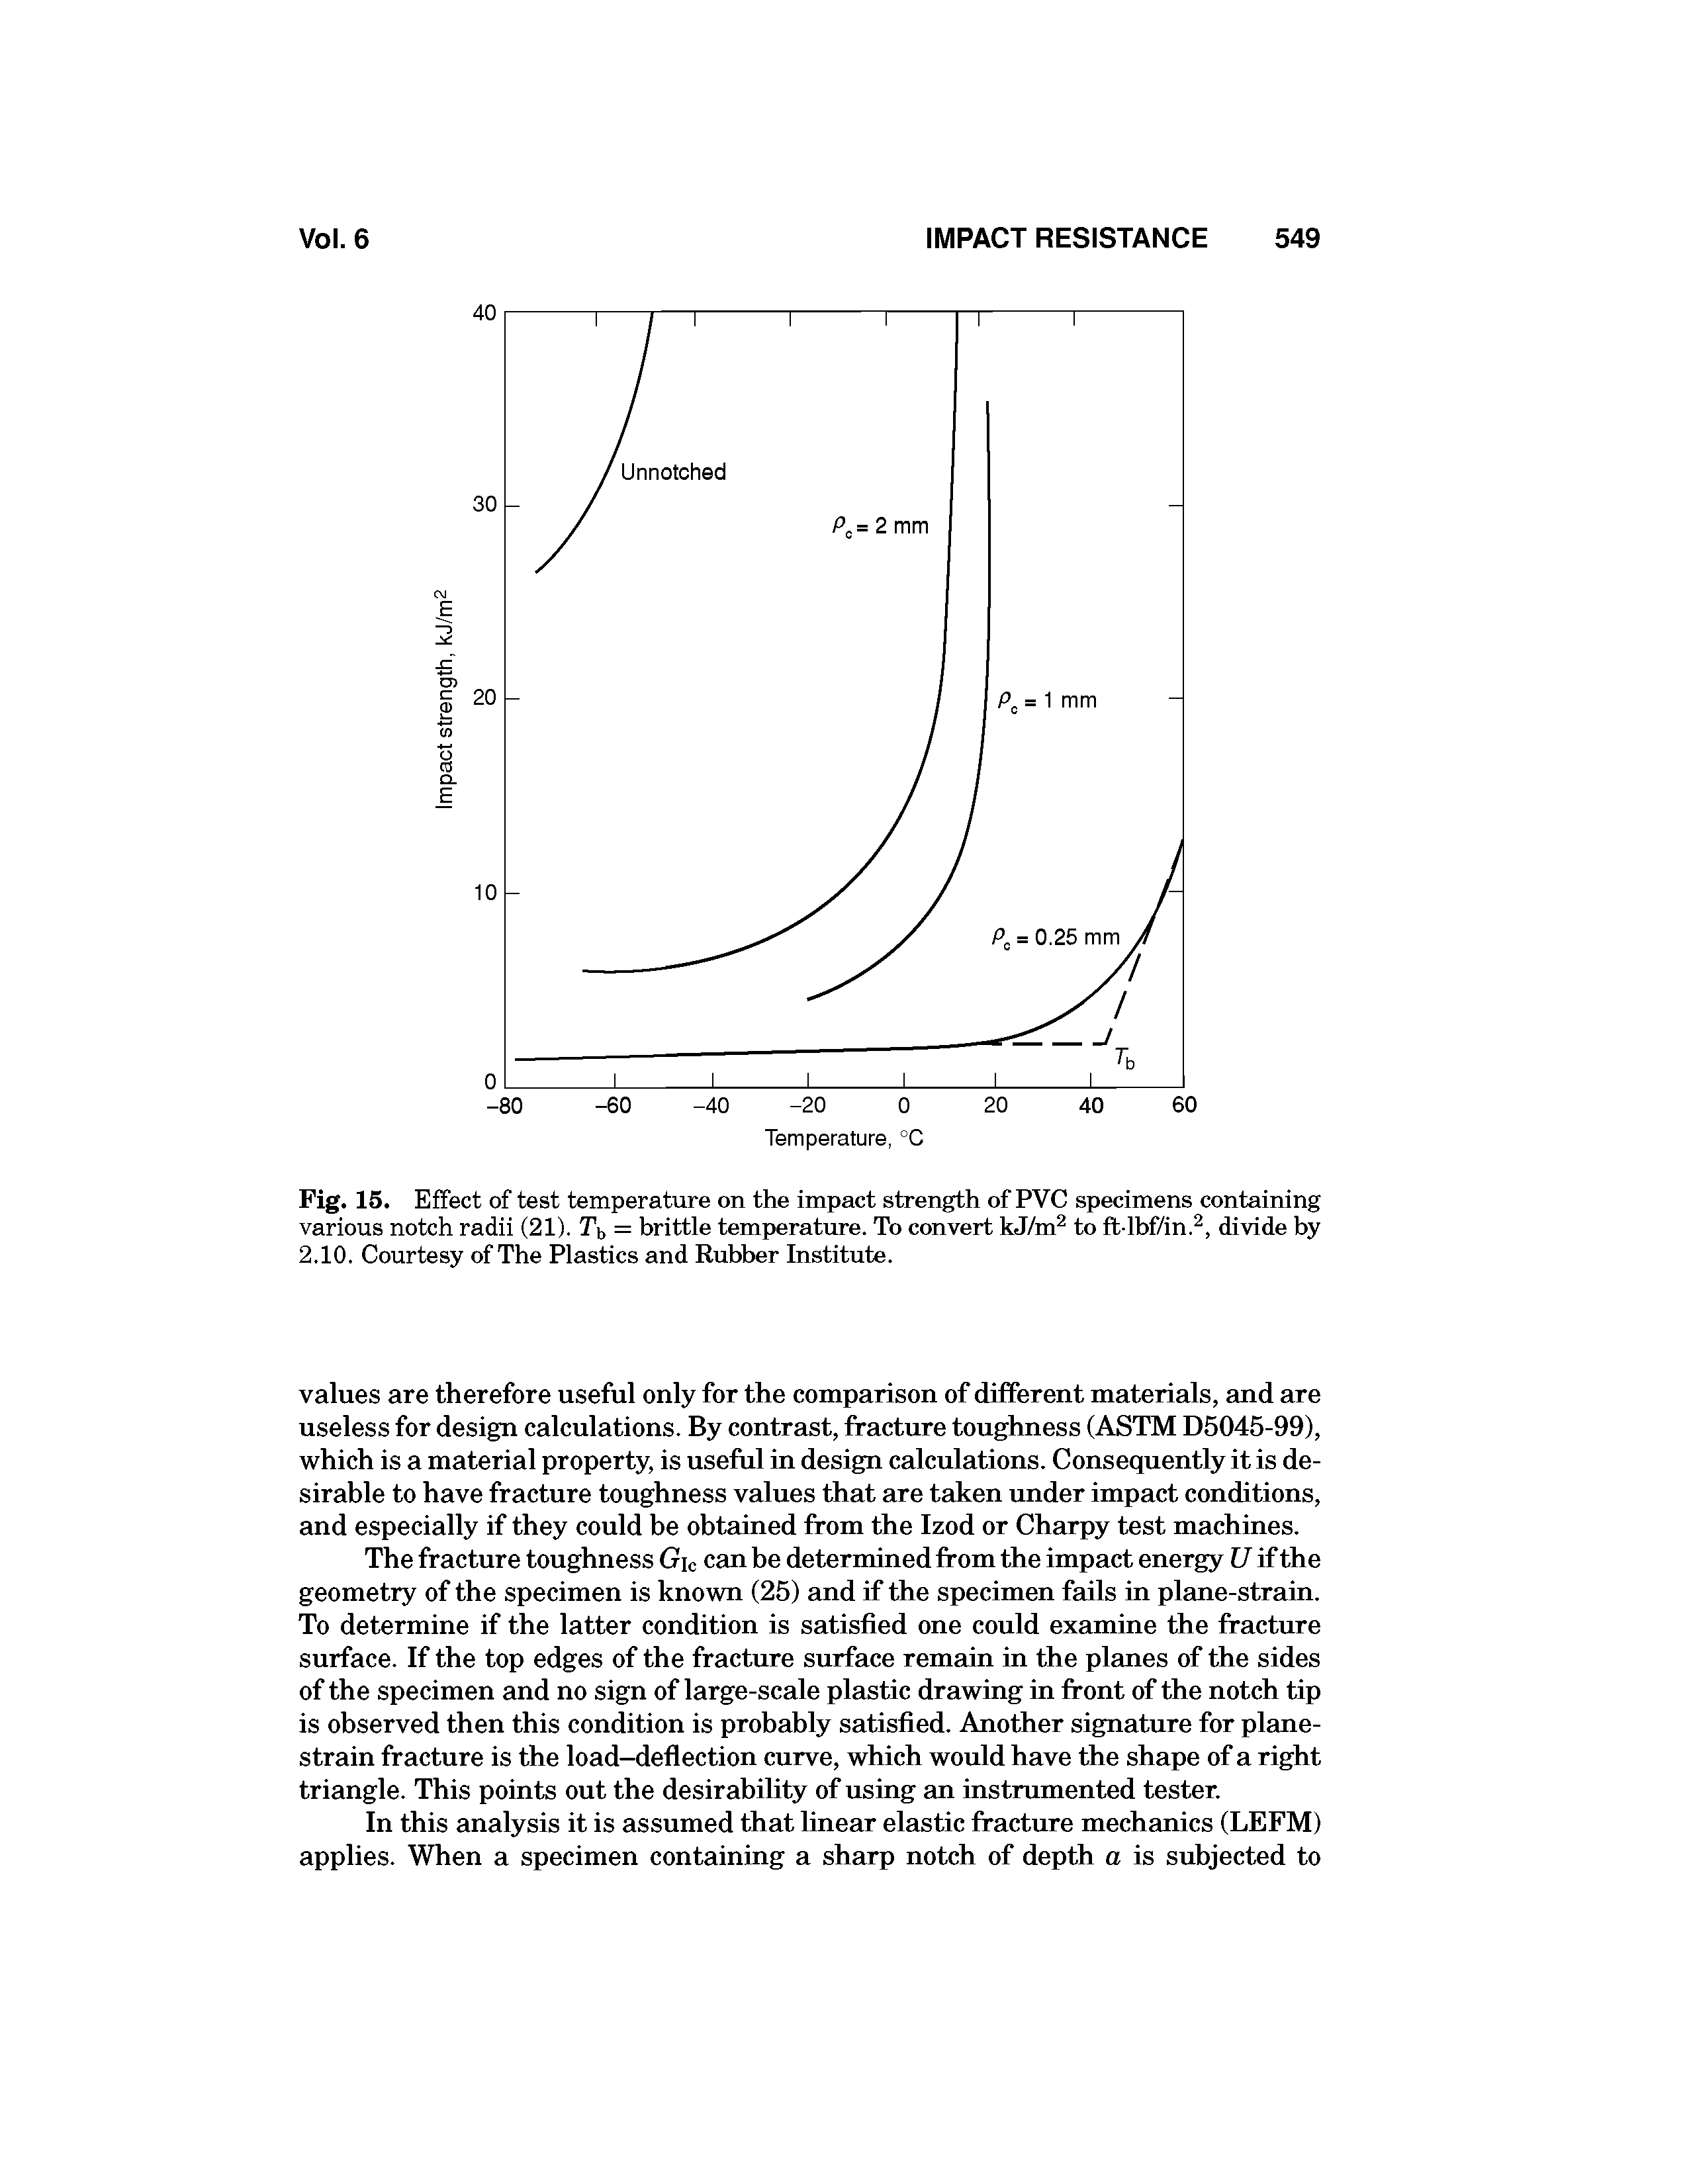 Fig. 15. Effect of test temperature on the impact strength of PVC specimens containing various notch radii (21). Tb = brittle temperature. To convert kJ/m to fl lbf/in., divide by 2.10. Courtesy of The Plastics and Rubber Institute.